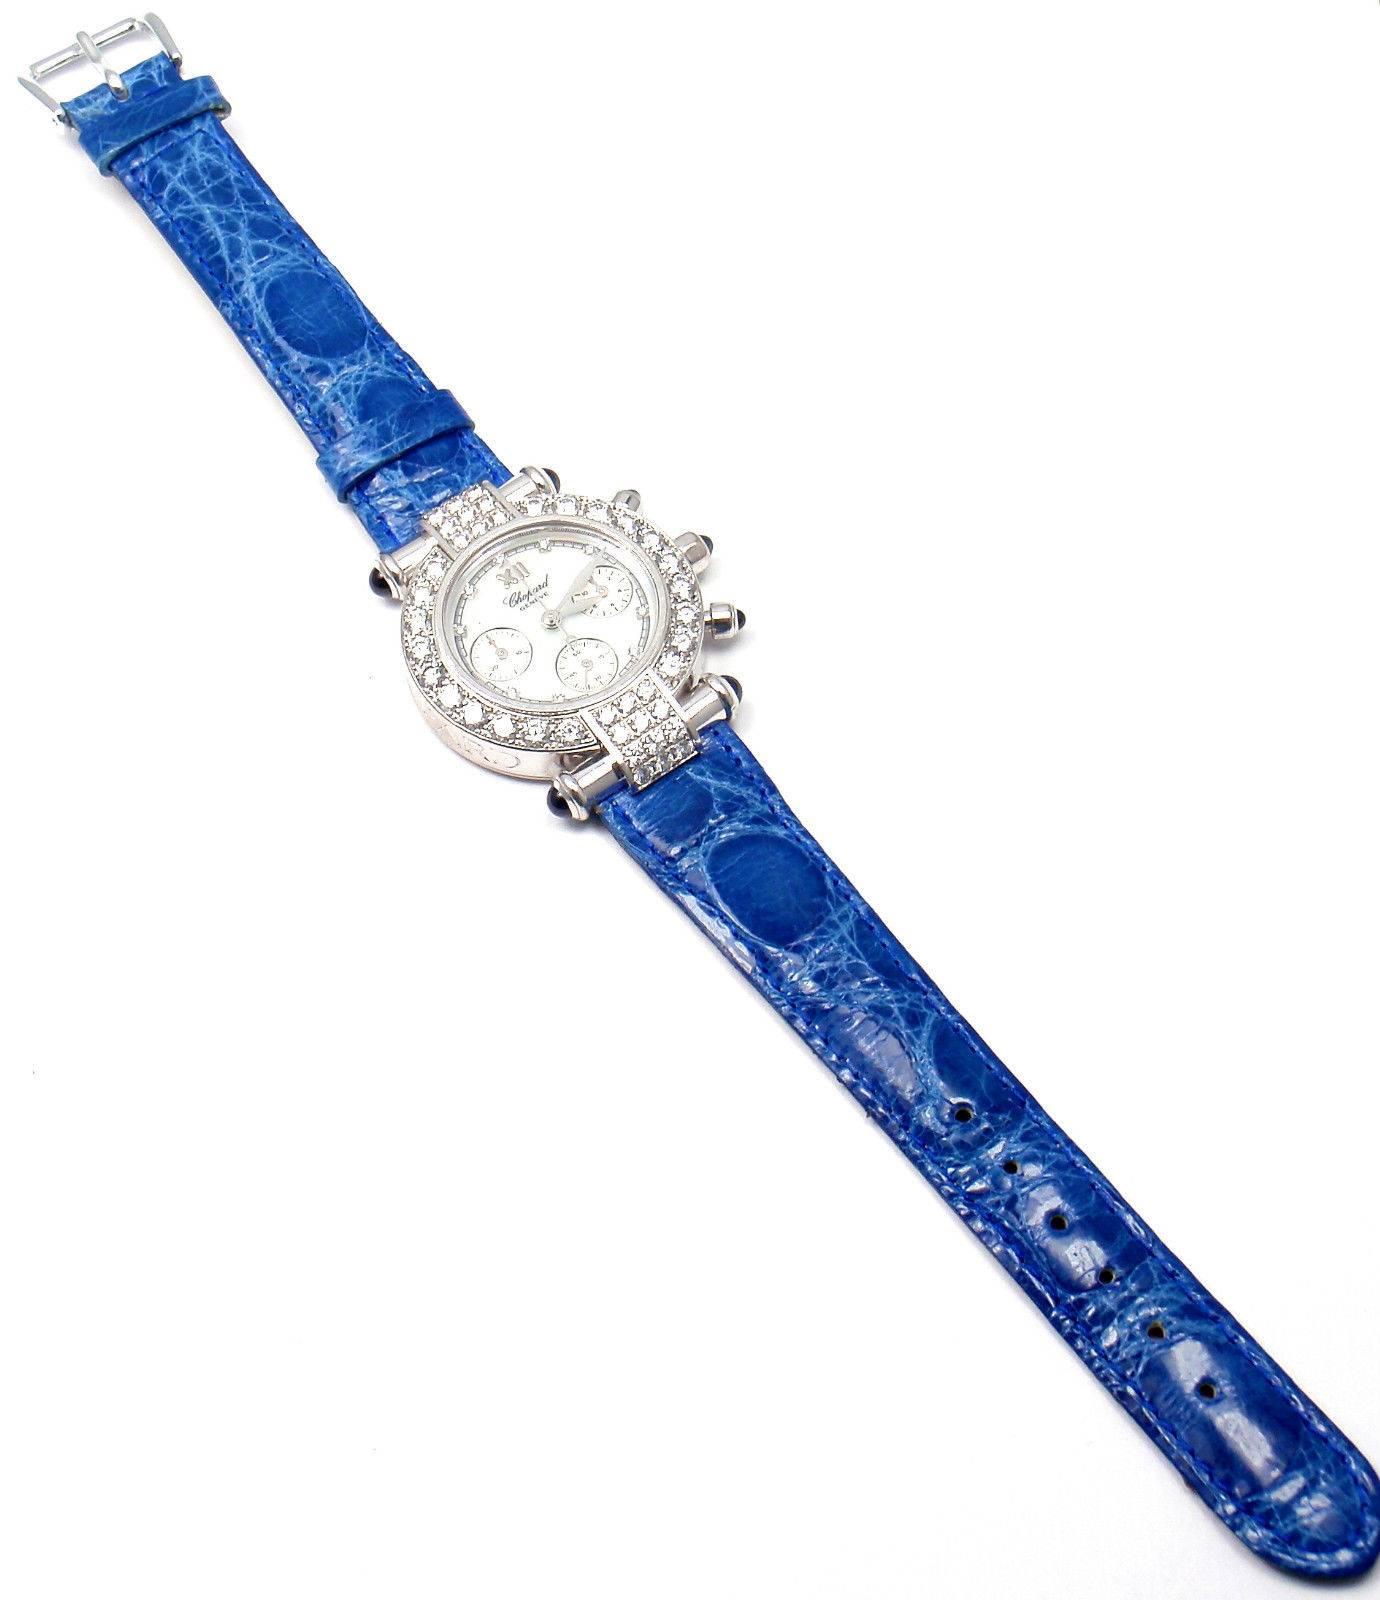 18k white gold diamond and sapphire Imperiale Chronograph wristwatch by Chopard.
Chopard Imperiale Chronograph Watch, round 18K white gold case (32mm diameter), bezel and lugs set with 44 diamonds, blue Debeers crocodile leather strap with 18K